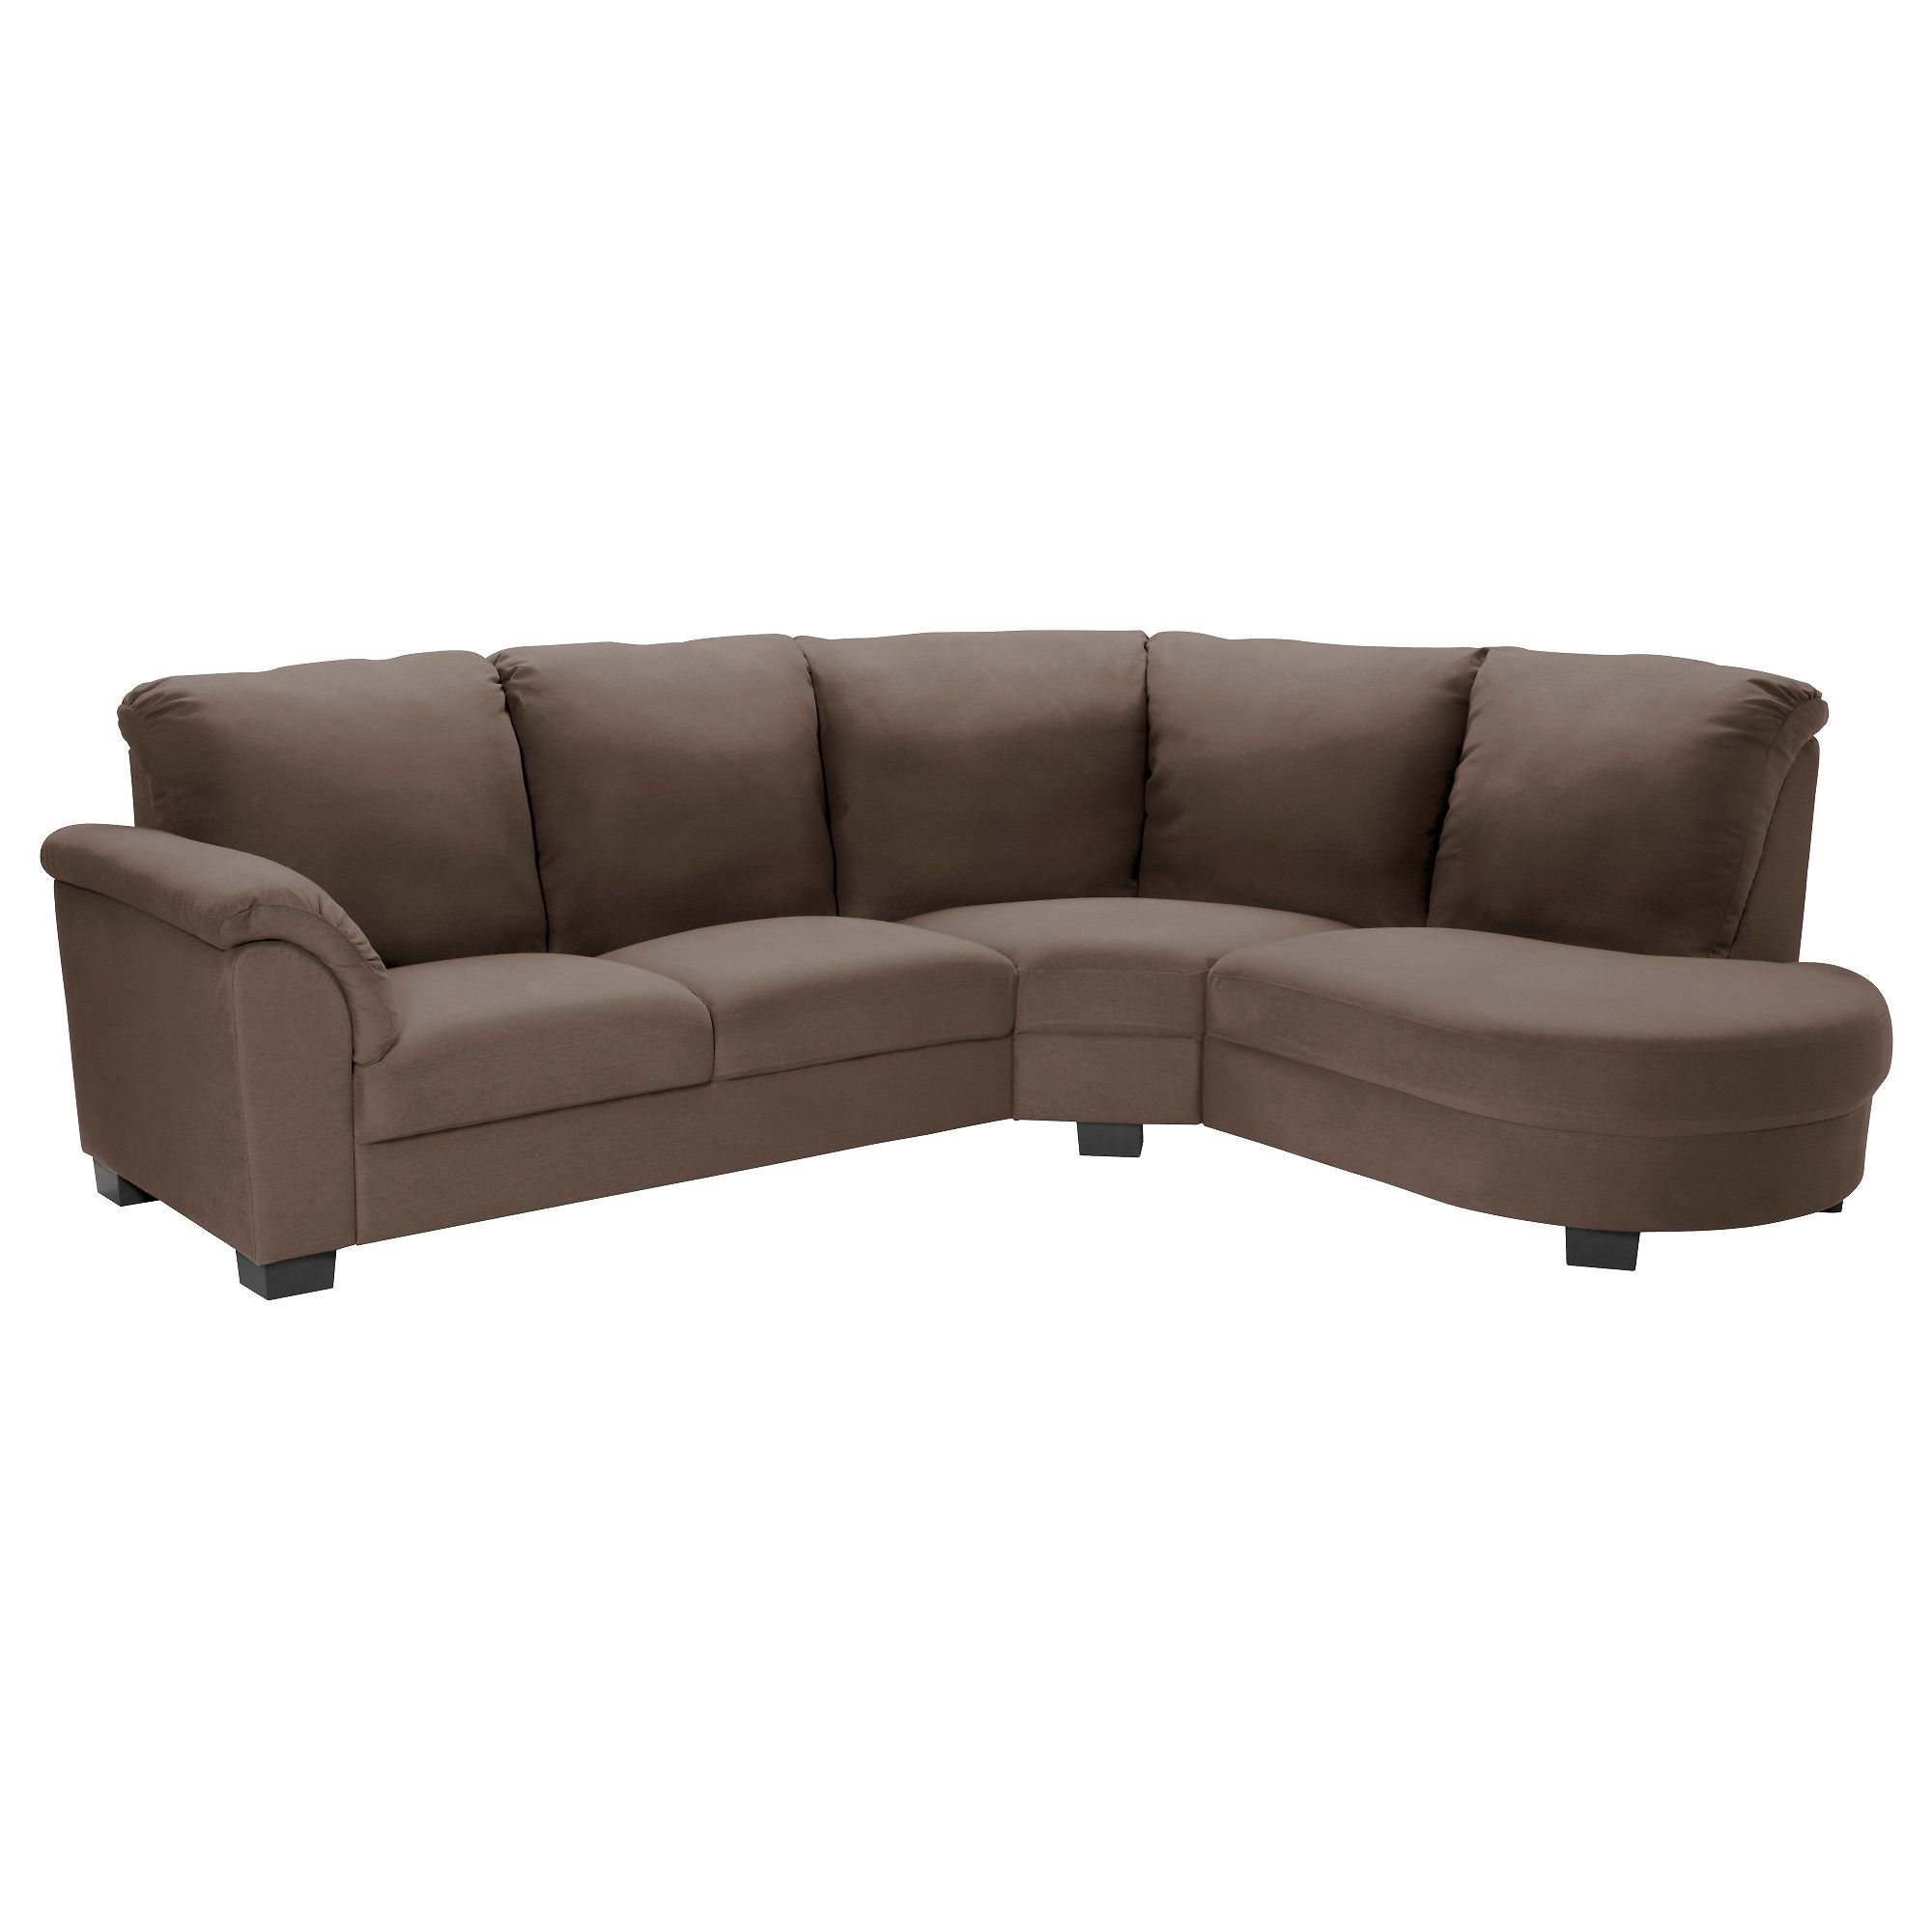 Luxury Sectional Sofas Ikea 94 Sofas And Couches Ideas With For Sectional Sofas At Ikea (View 15 of 15)